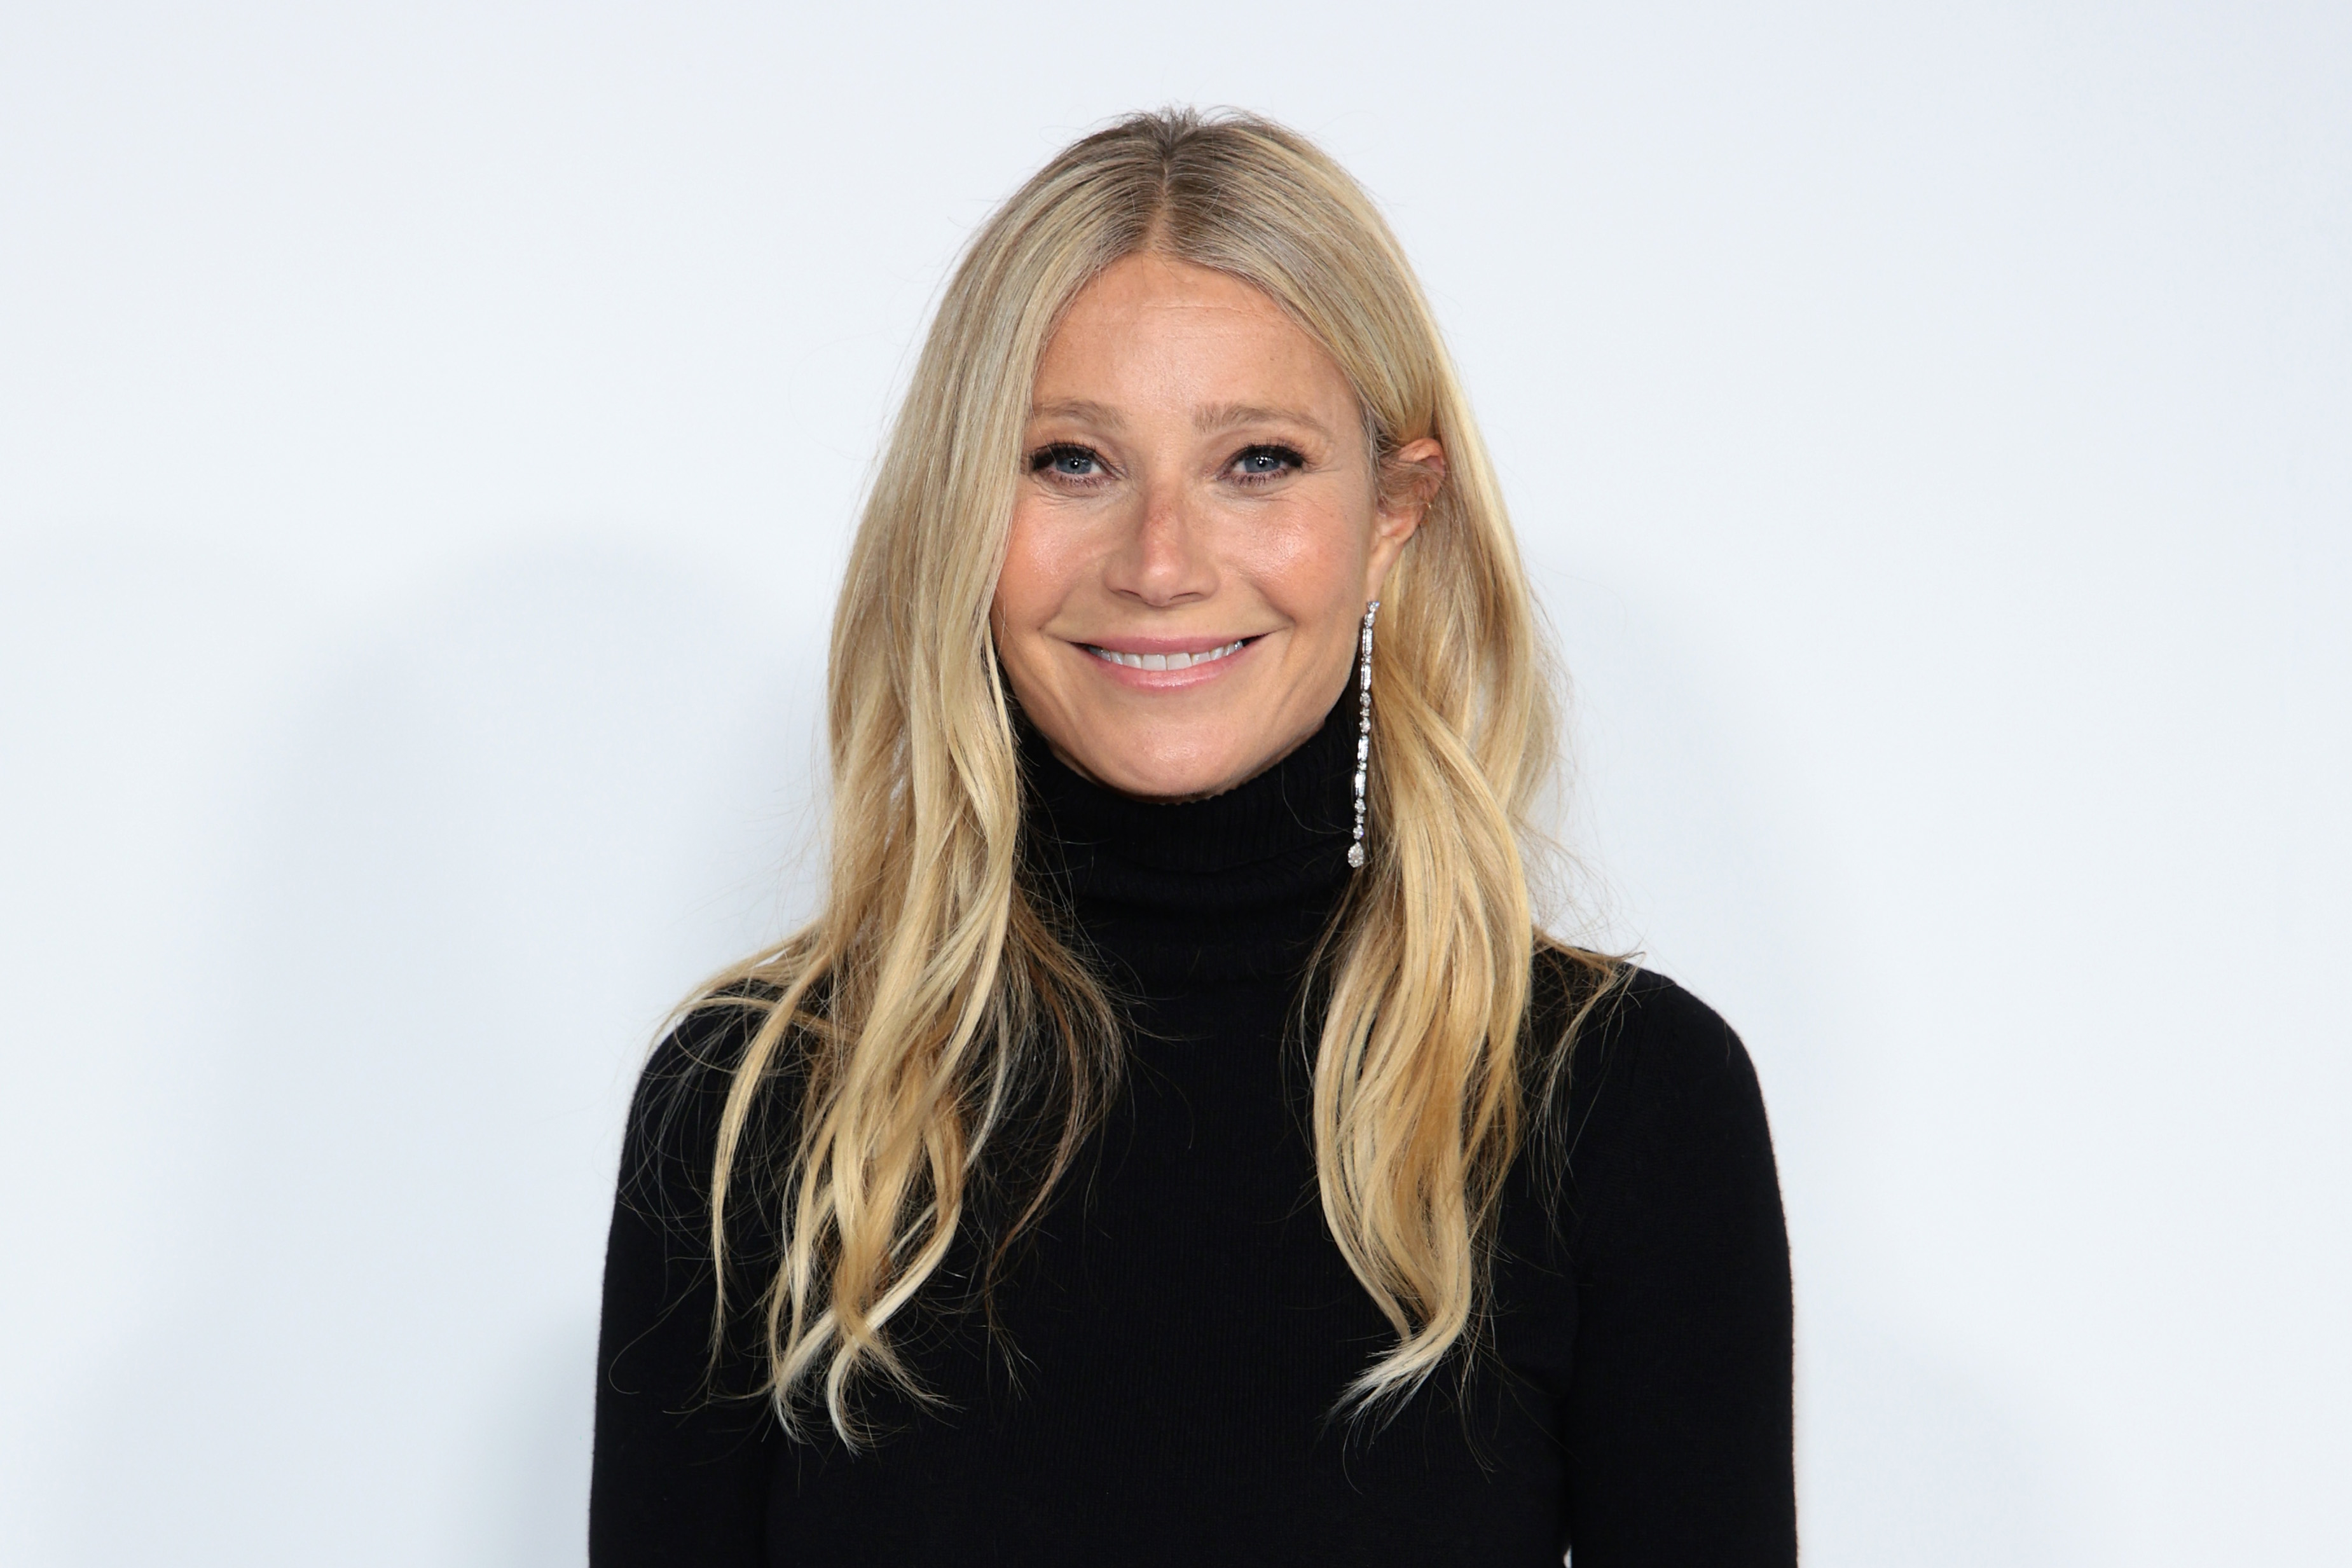 Gwyneth Paltrow smiling in a black turtleneck, with her hair down and long earrings